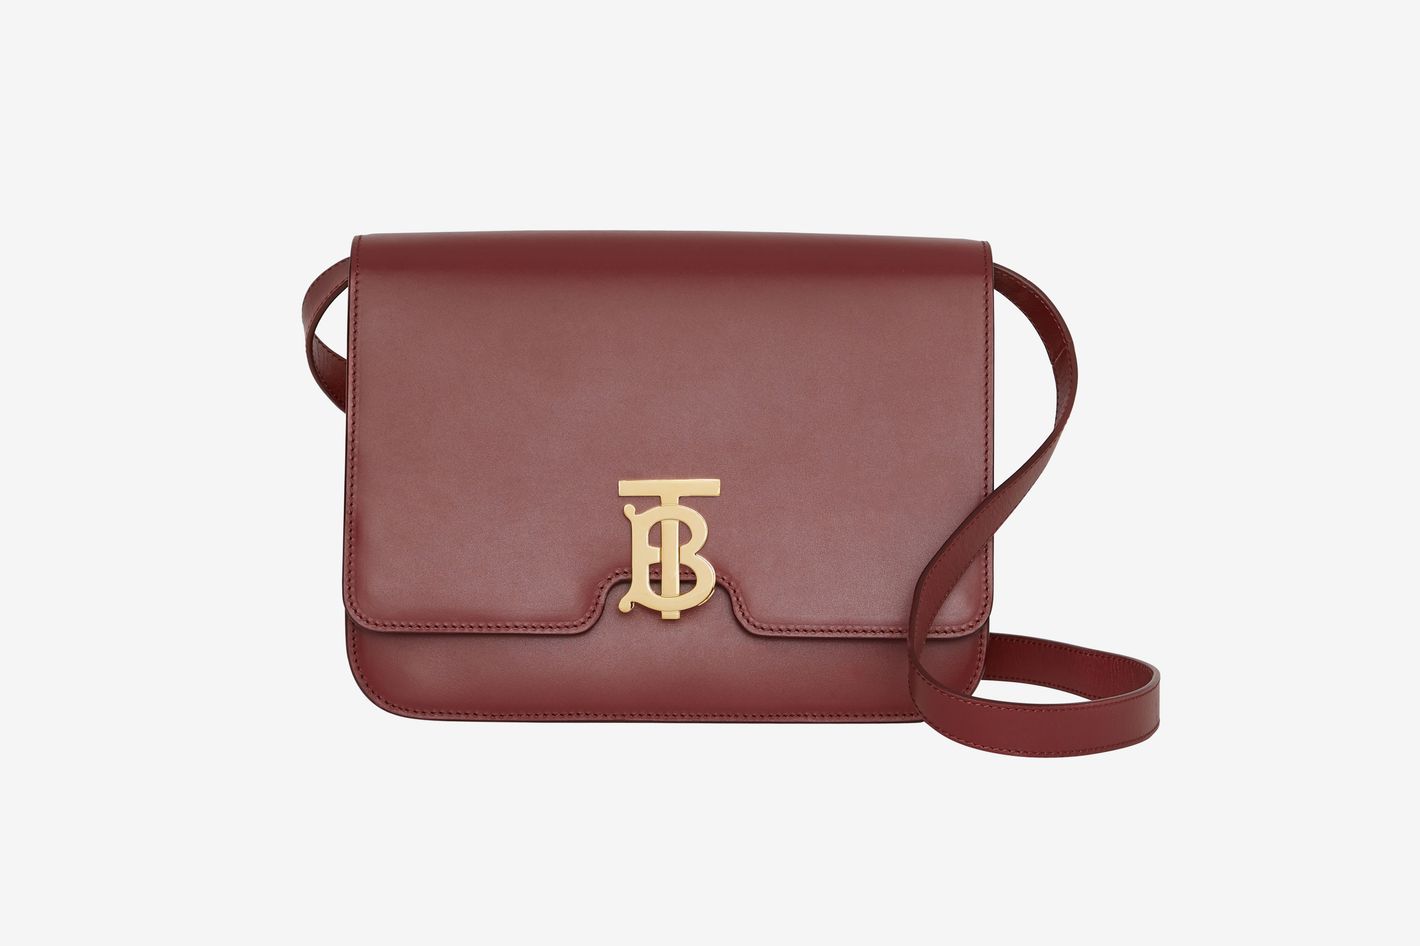 See Burberry's TB Bag Designed by Riccardo Tisci